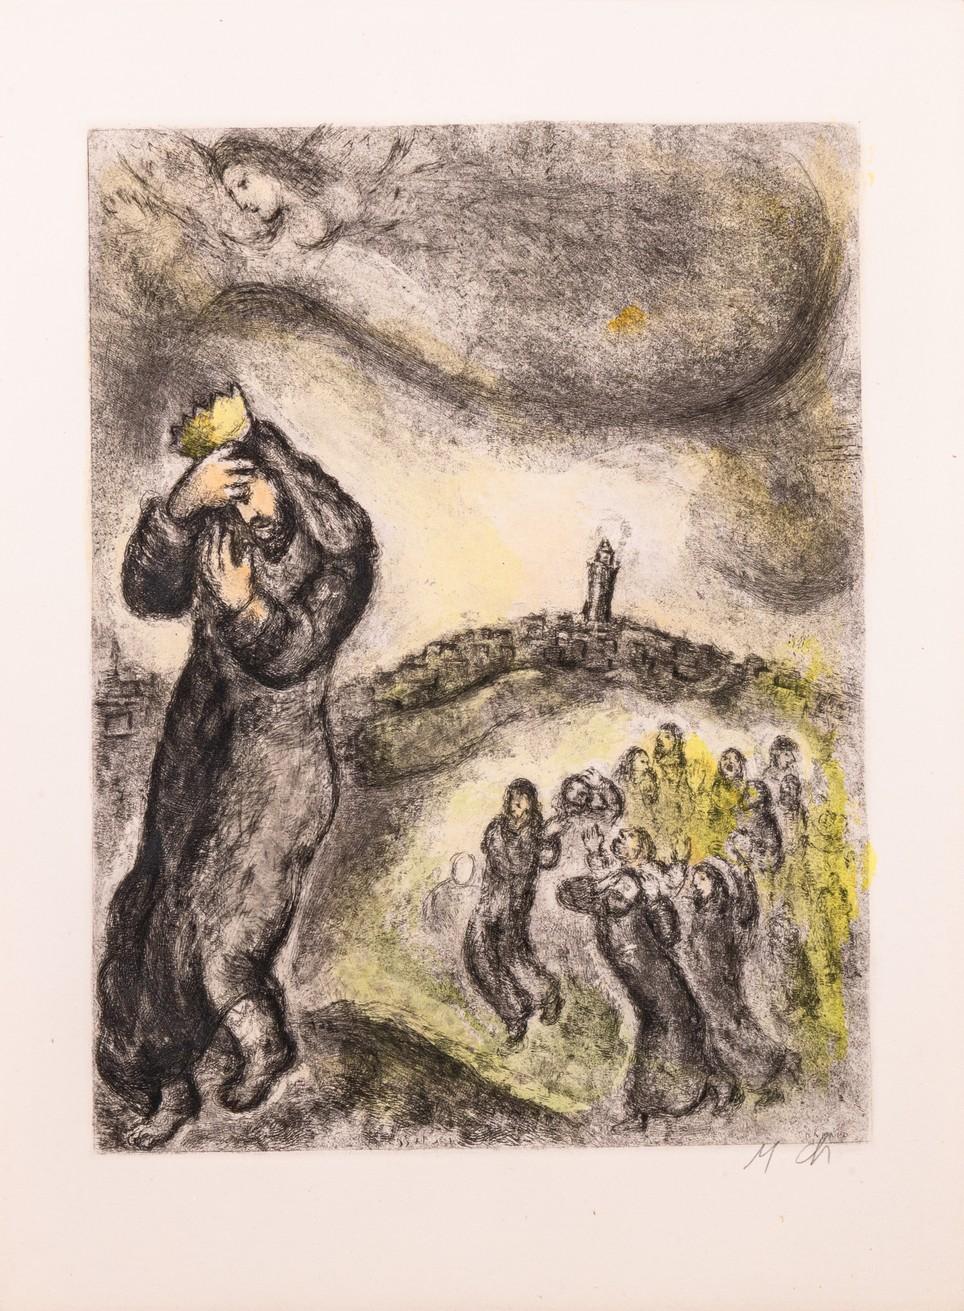 A spiritual modern etching with hand coloring on Arches wove paper titled “David Montant La Colline des Oliviers (David Ascending The Mount of Olives)” (pl. 71 from The Bible Series) by Marc Chagall. Hand initialed in pencil on the bottom right with